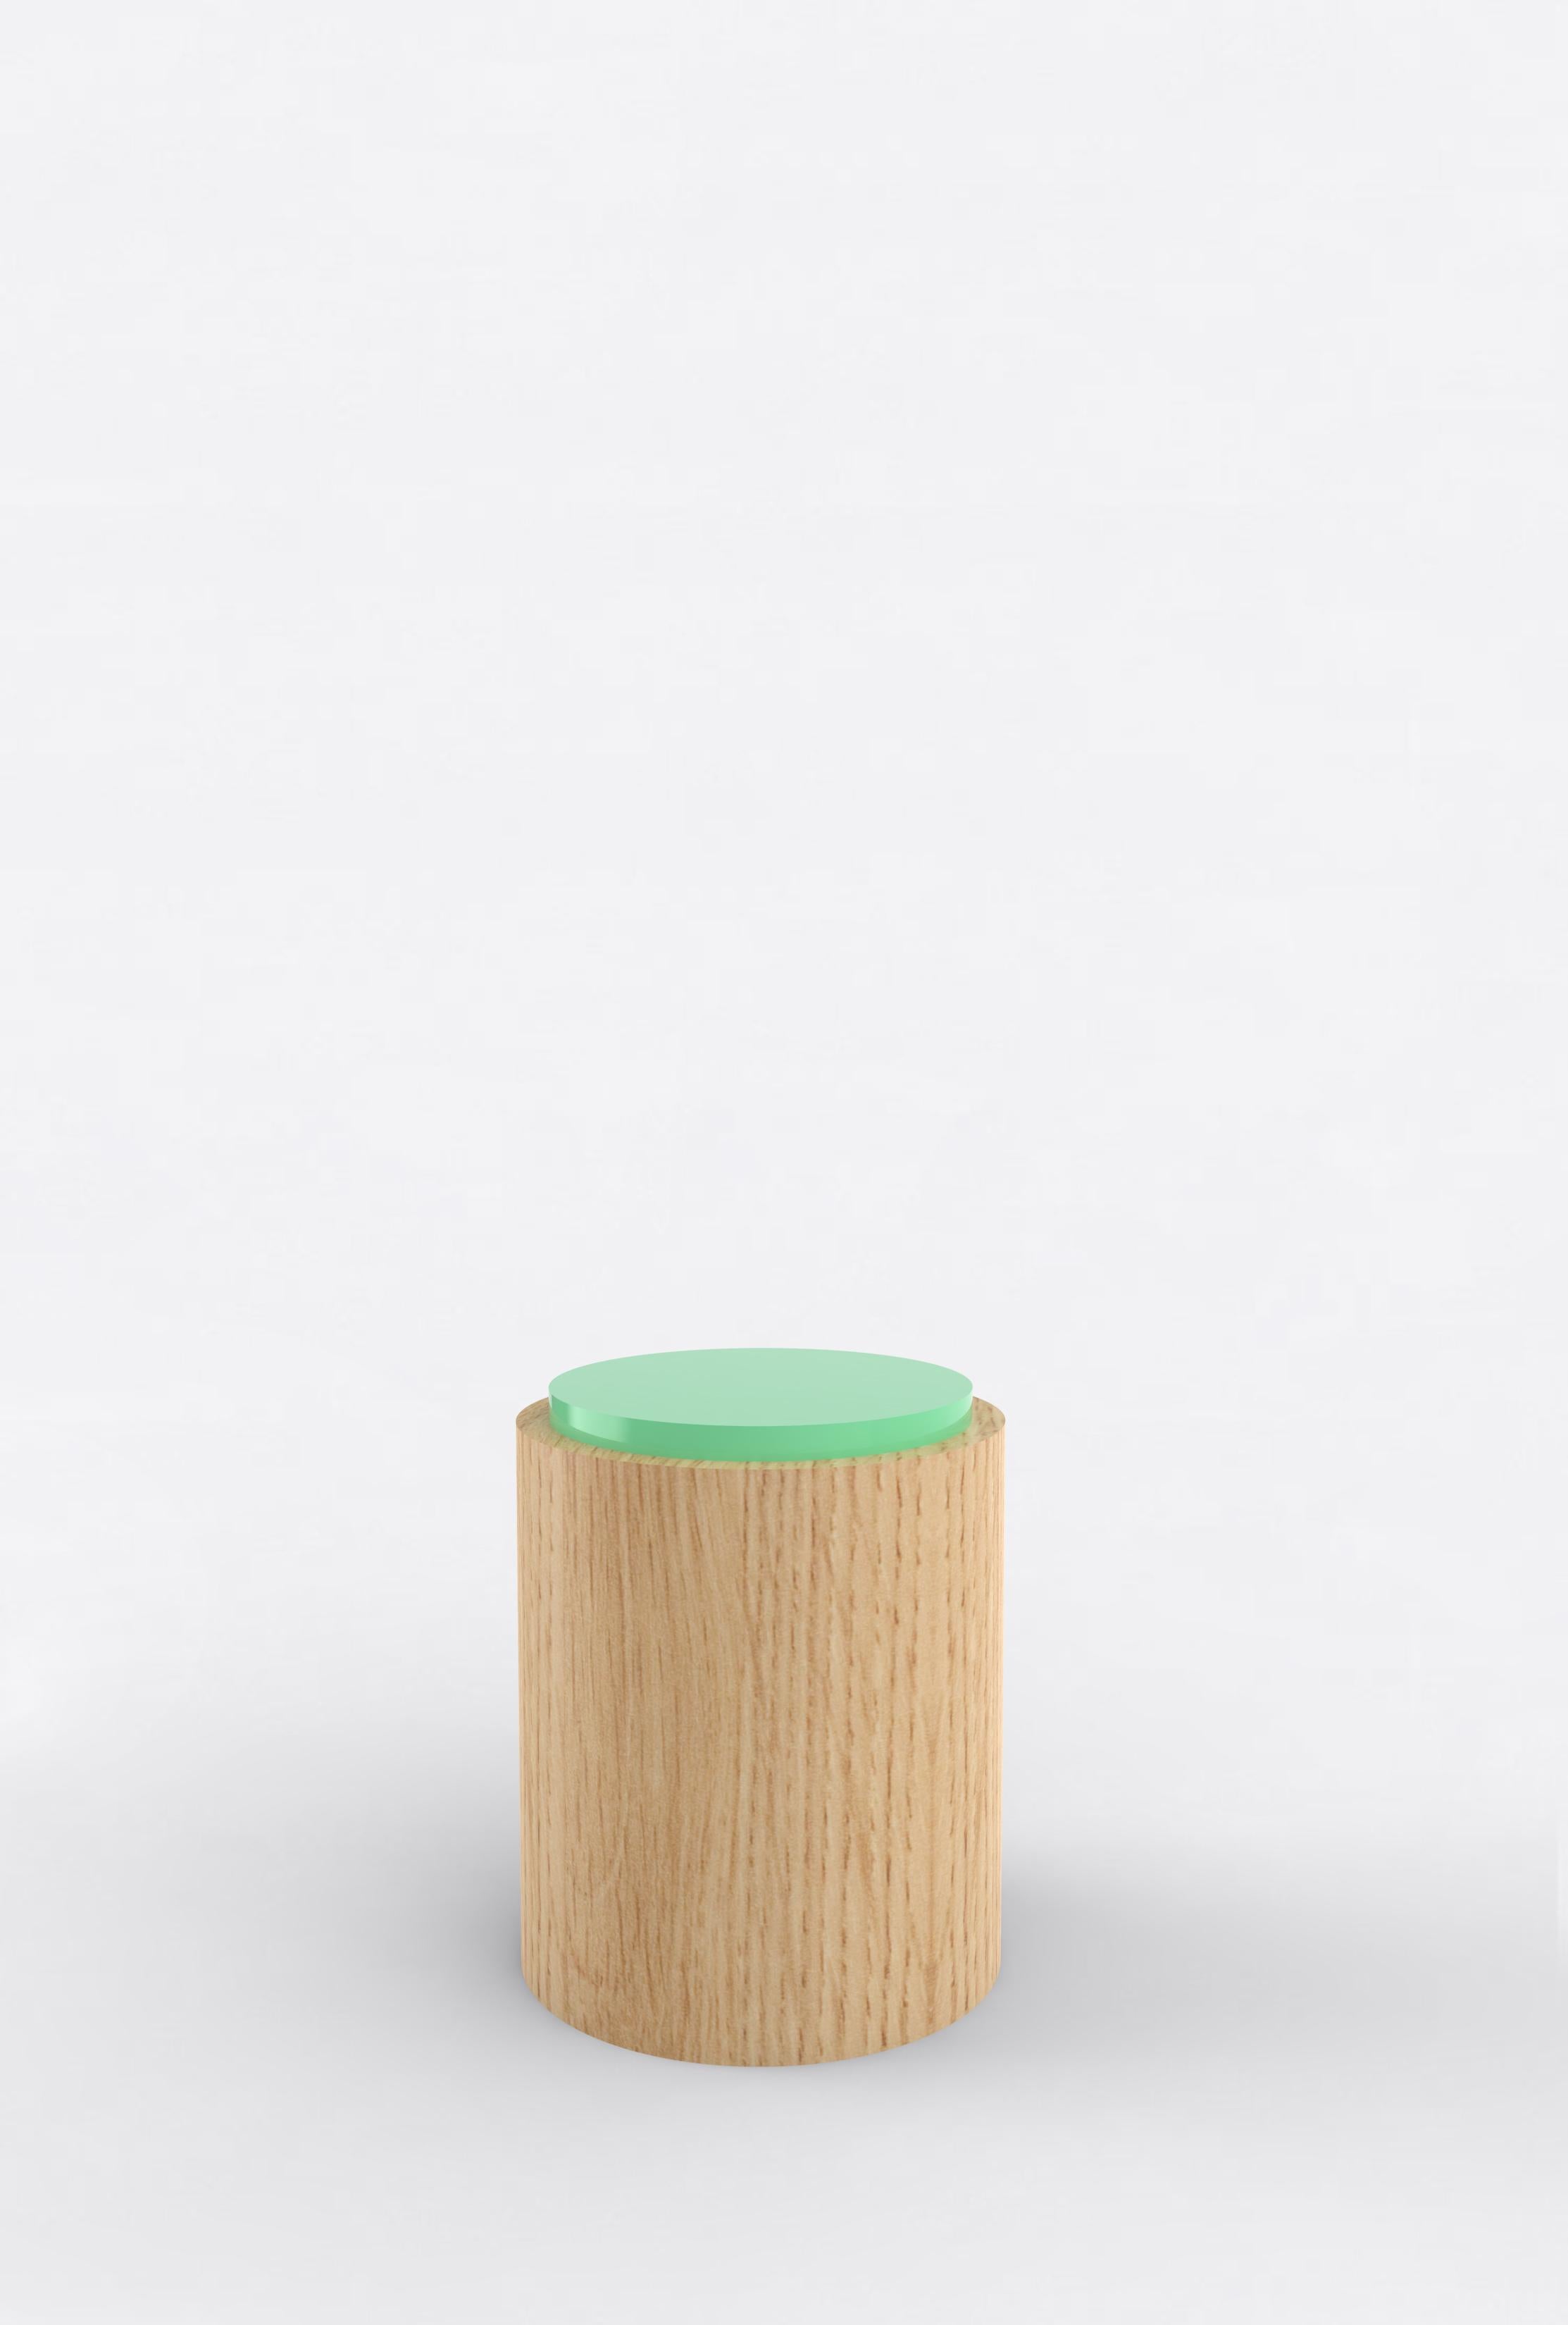 Contemporary 104C Side Table in Oak and Color by Orphan Work, 2020 In New Condition For Sale In Los Angeles, CA